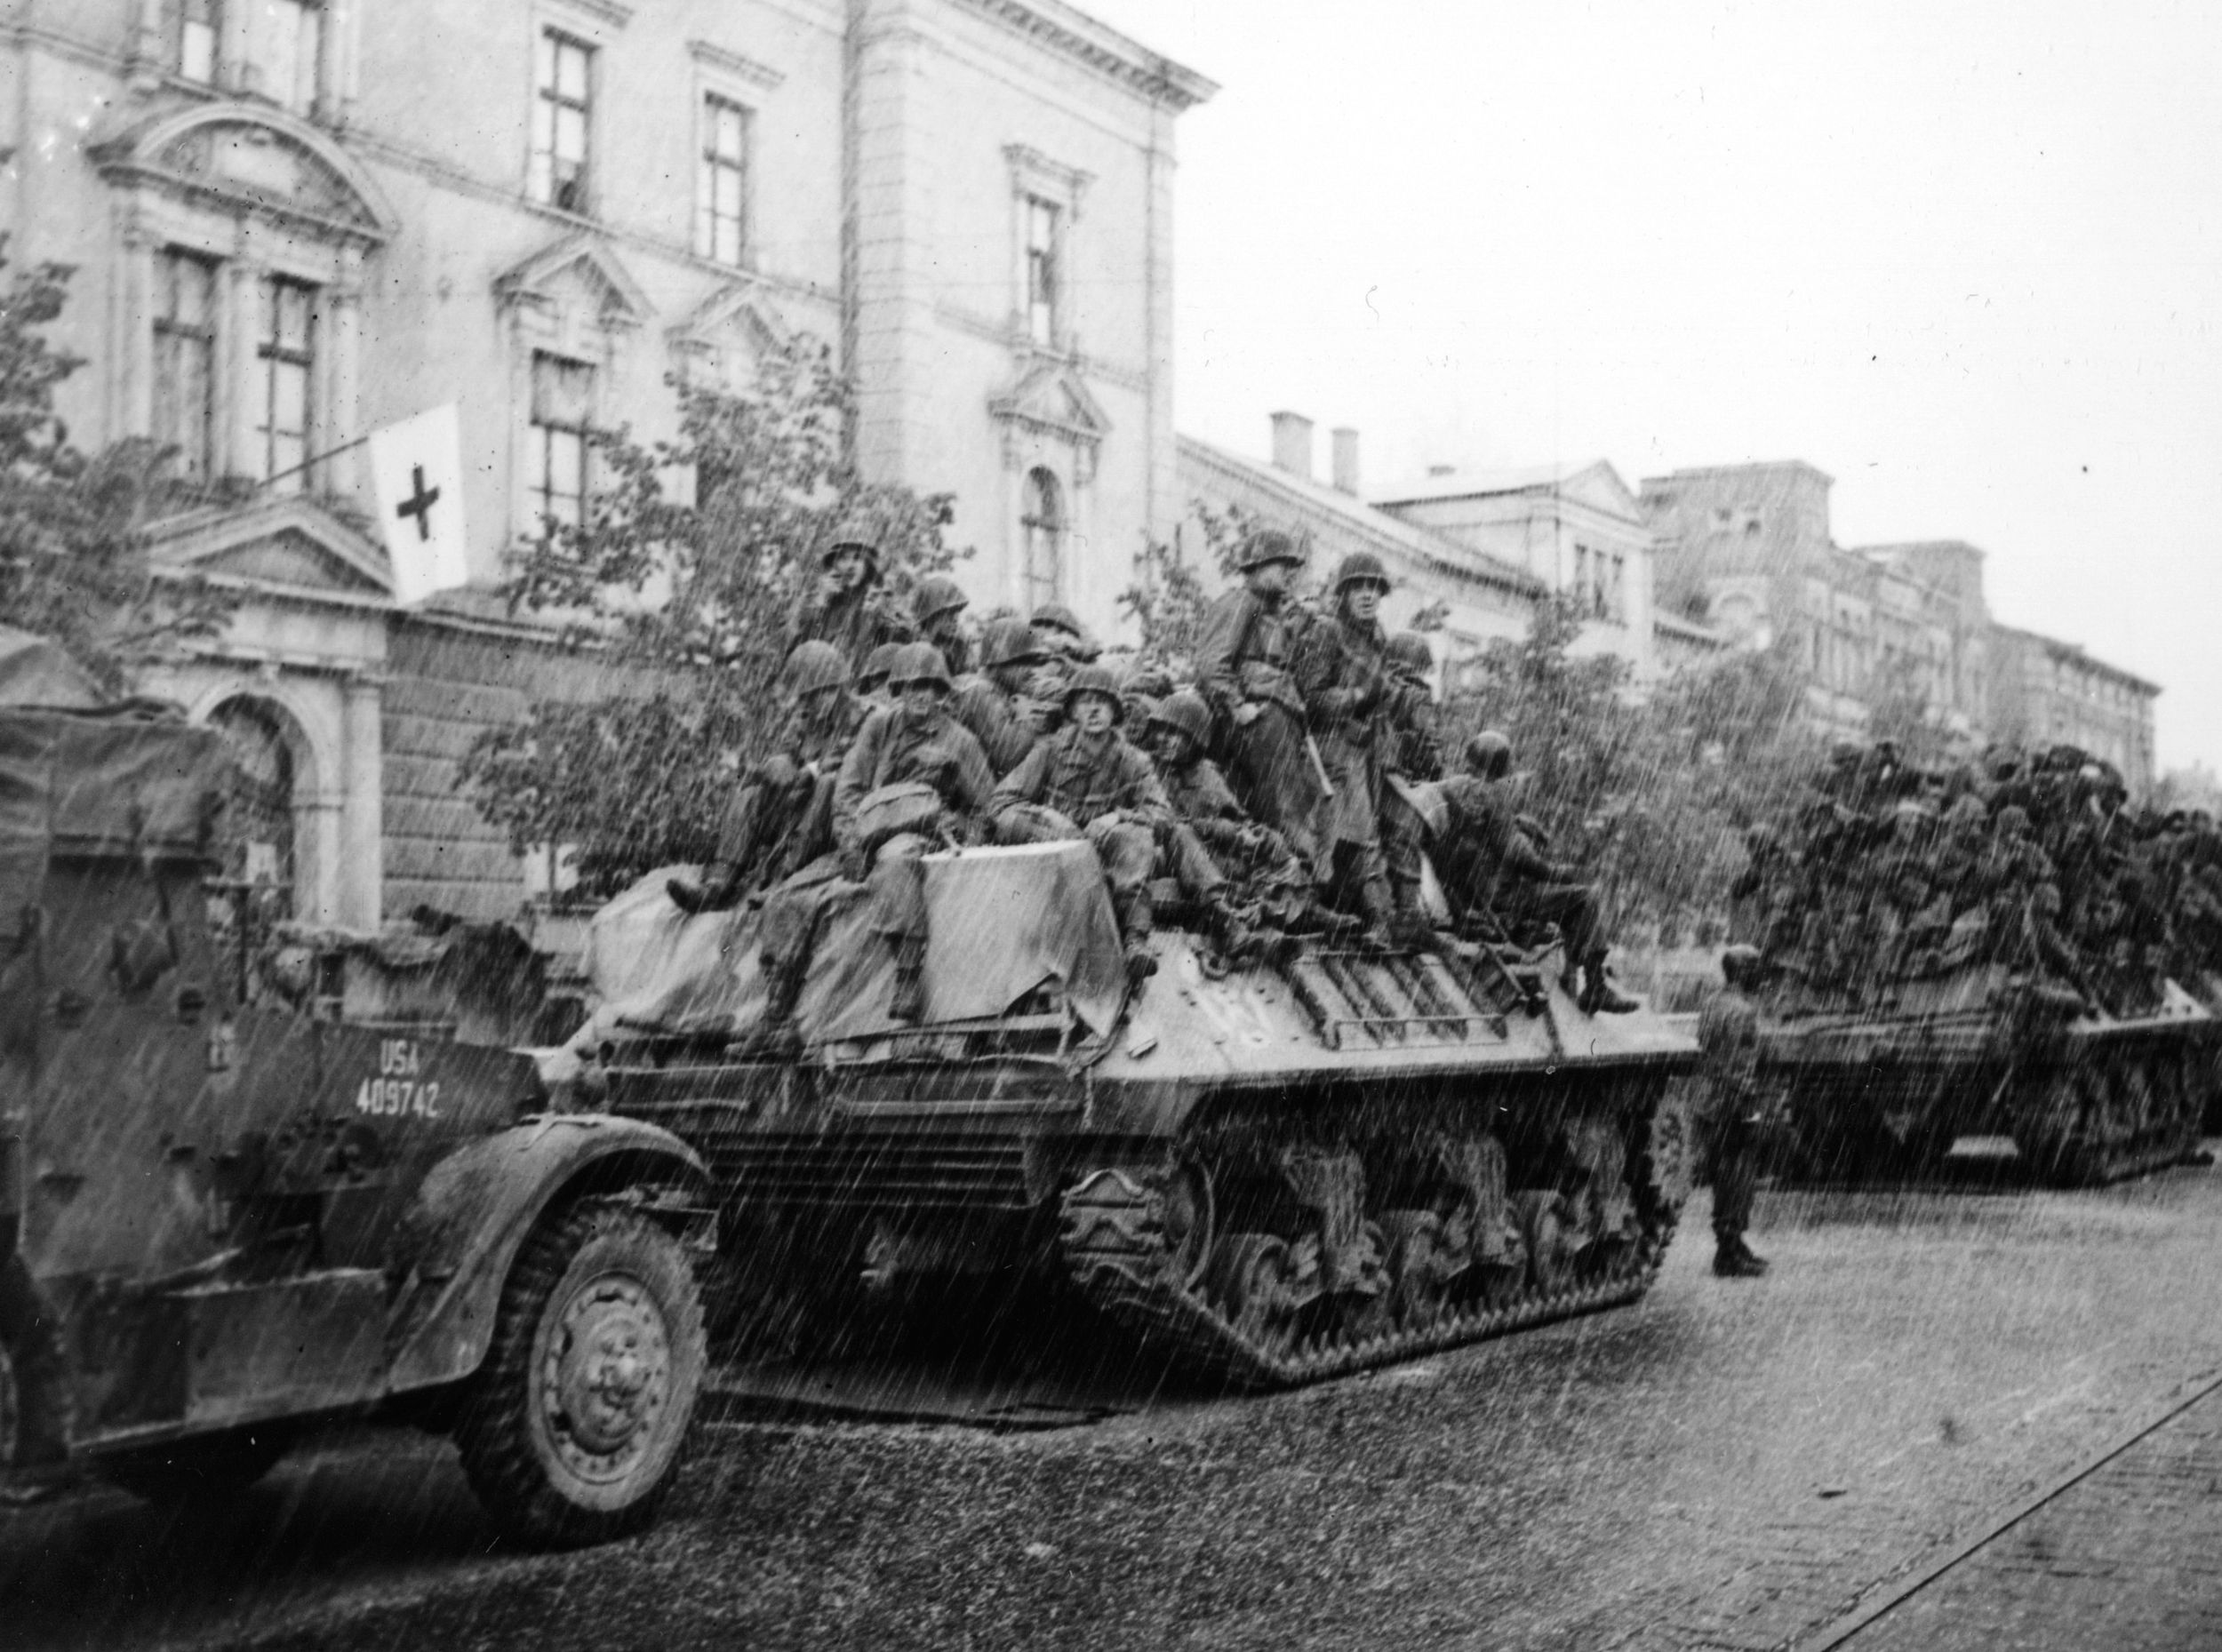 Enduring a storm of hail instead of bullets, 3rd Division infantrymen ride atop Sherman tanks past a hospital in the Bavarian city of Augsburg, Germany, April 1945.